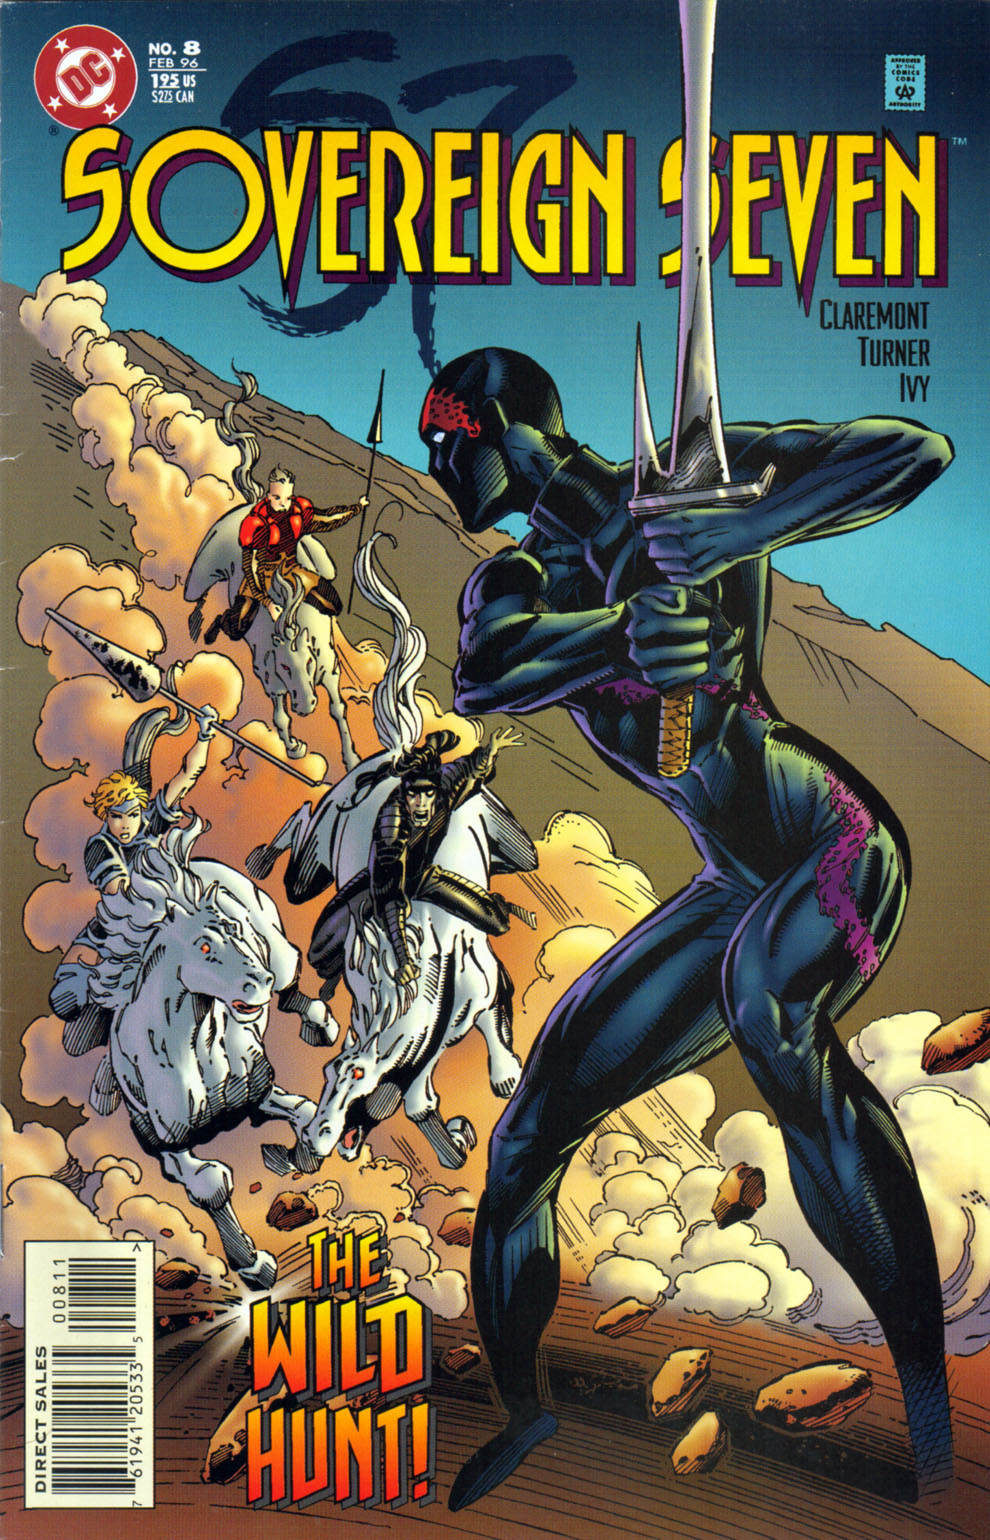 Read online Sovereign Seven comic -  Issue #8 - 1